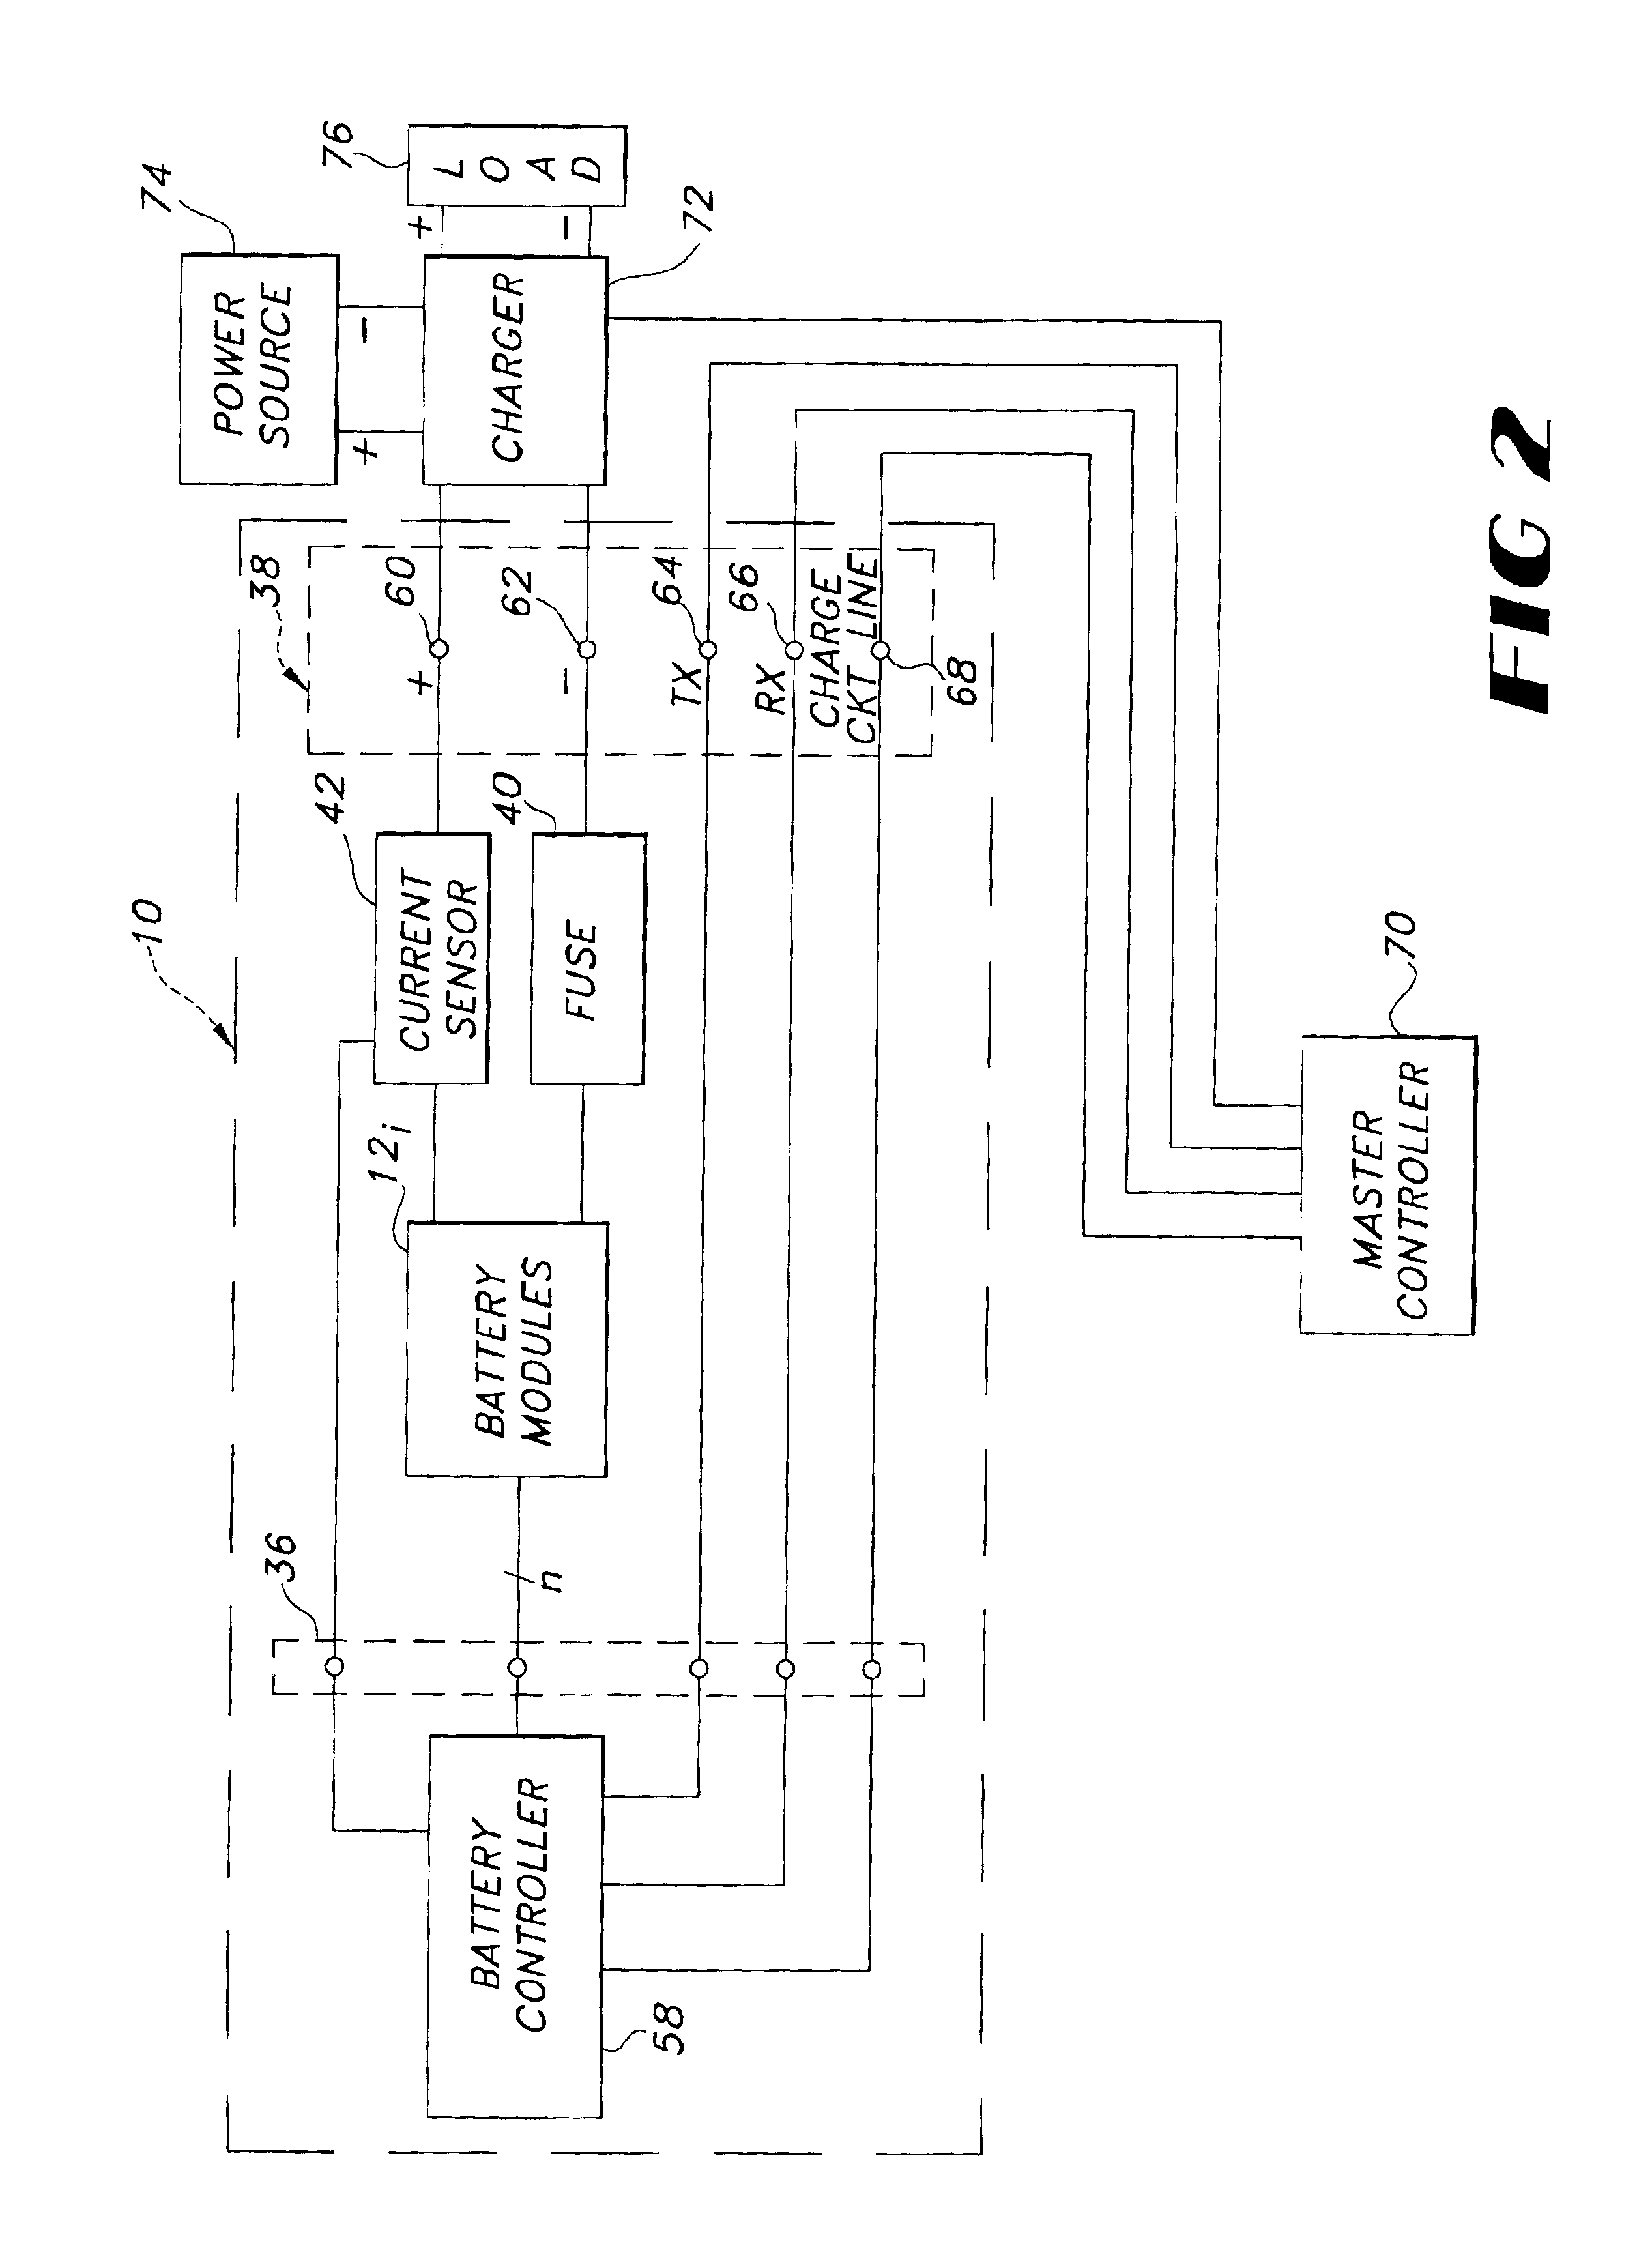 Battery pack having flexible circuit connector